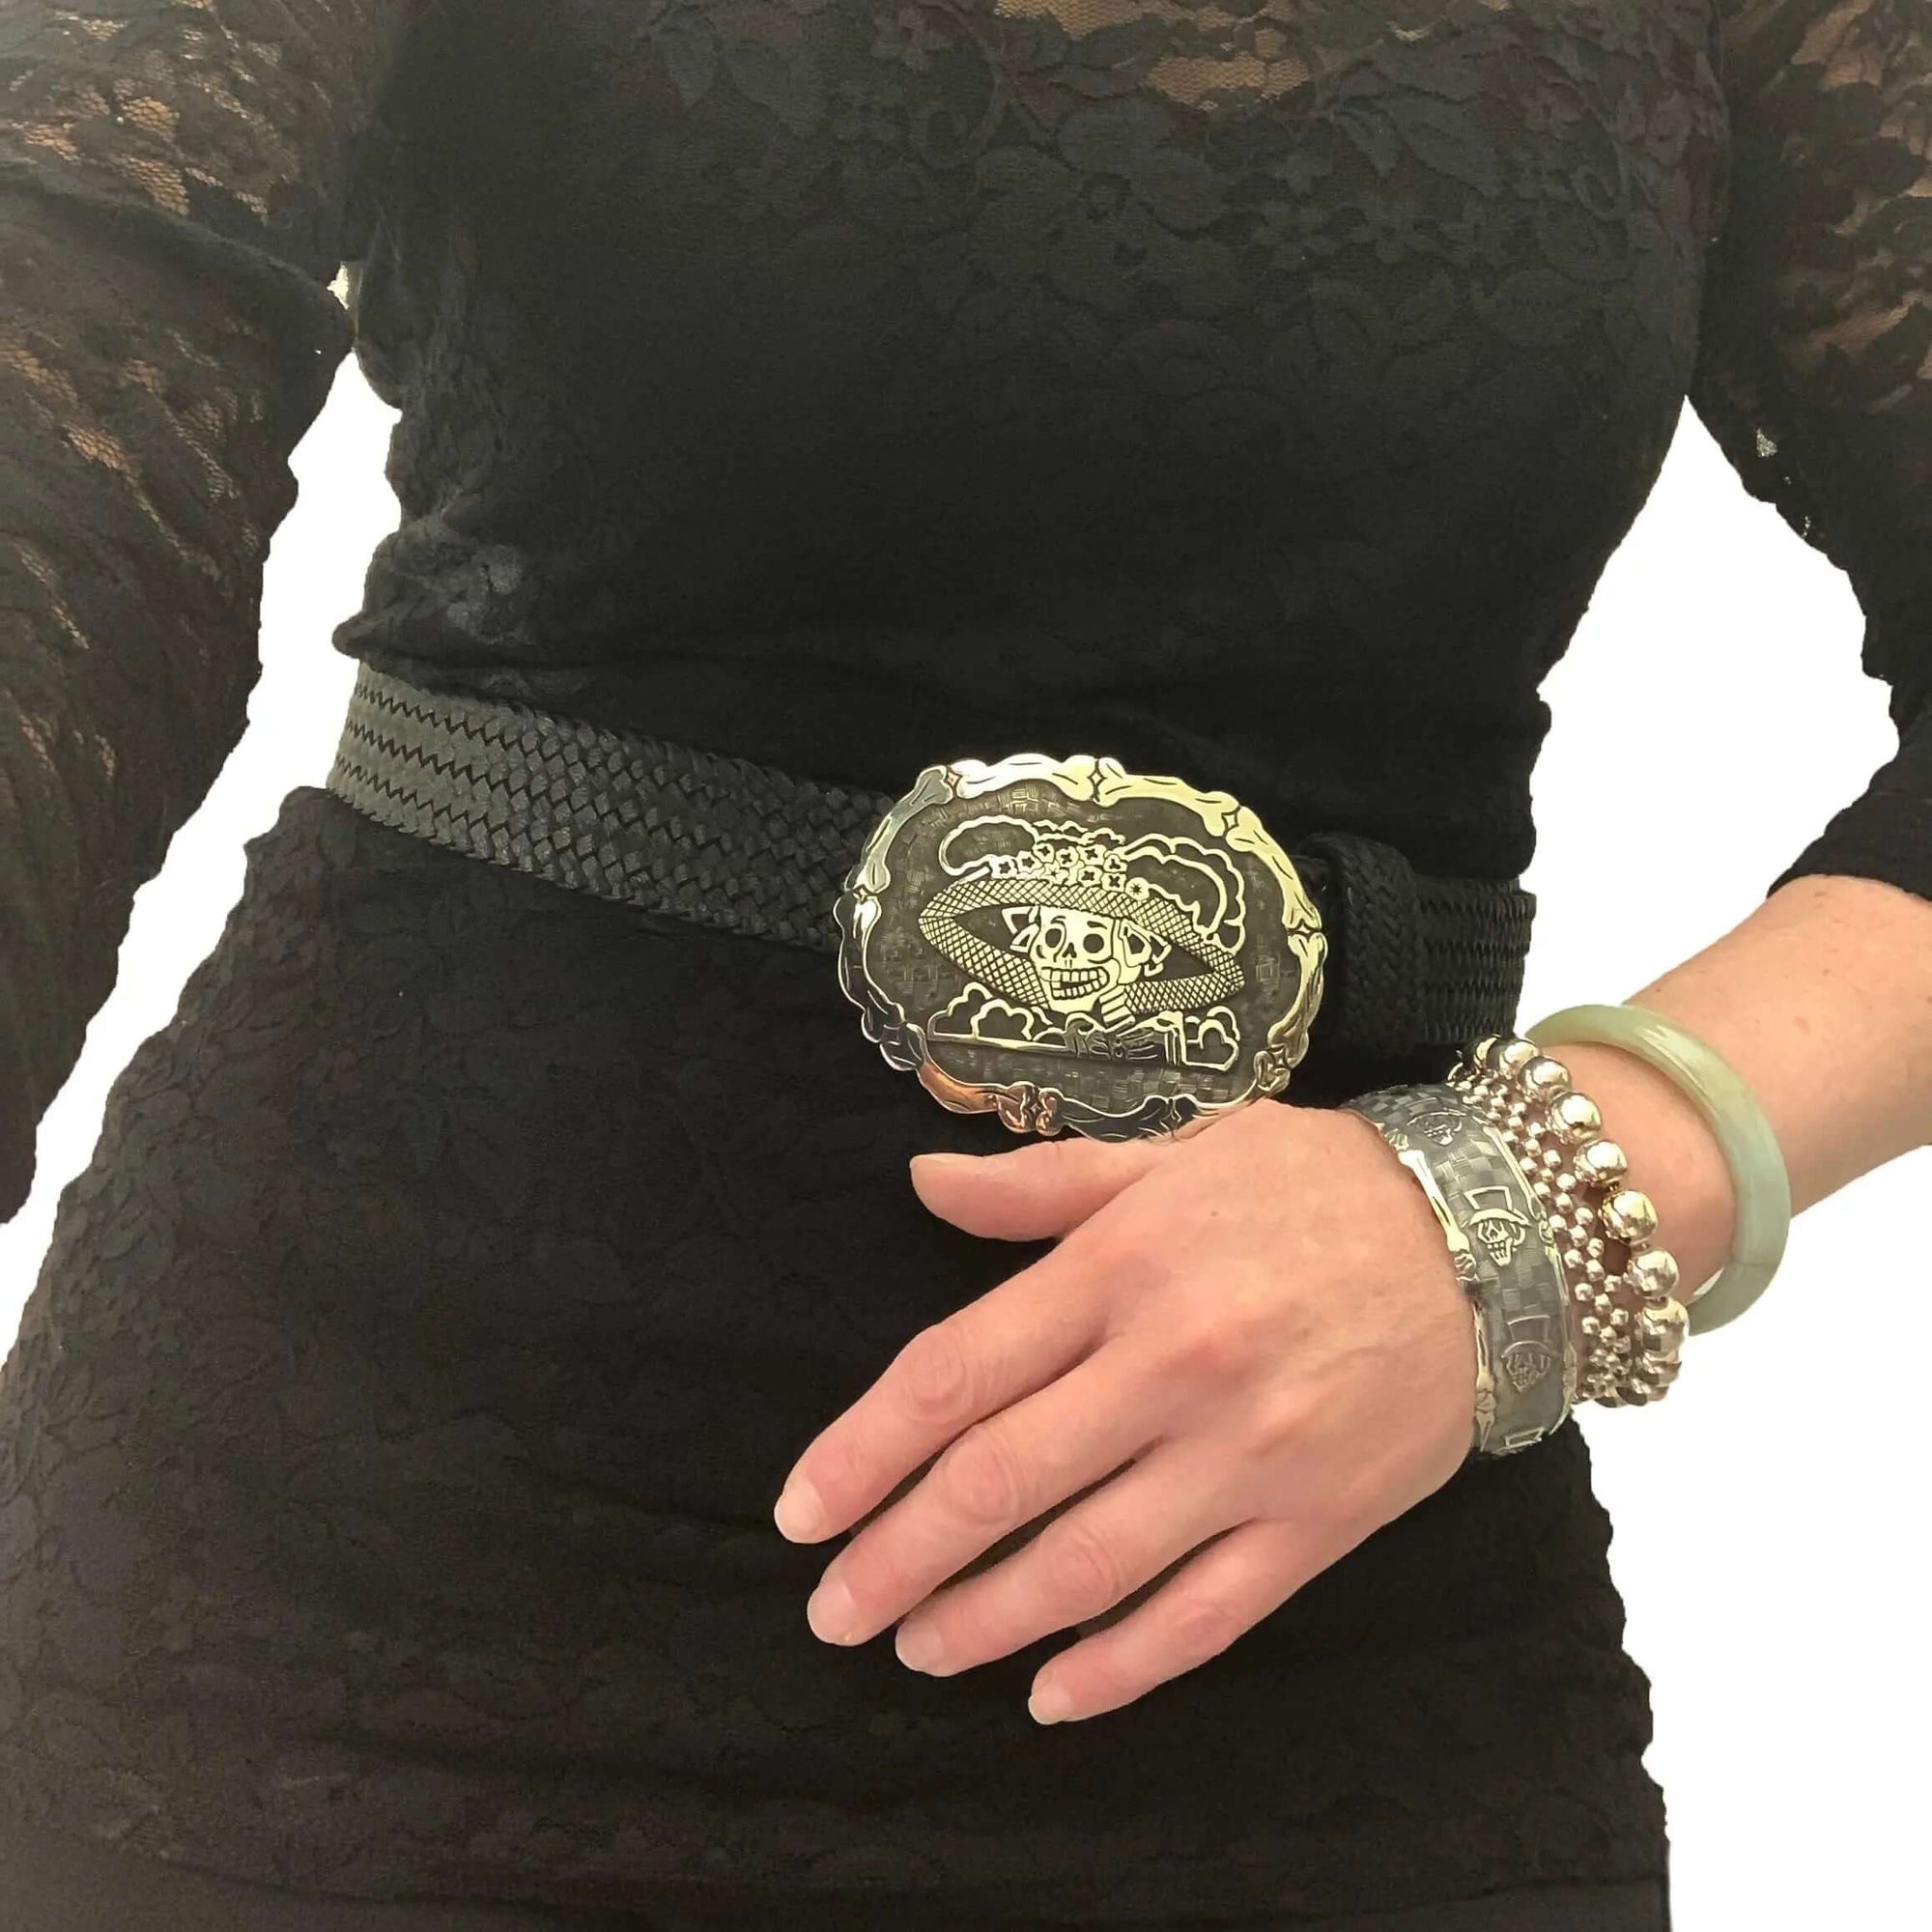 La-Catrina-Silver-Buckle-With-Leather-Belt-with-model-Nueve-Sterling